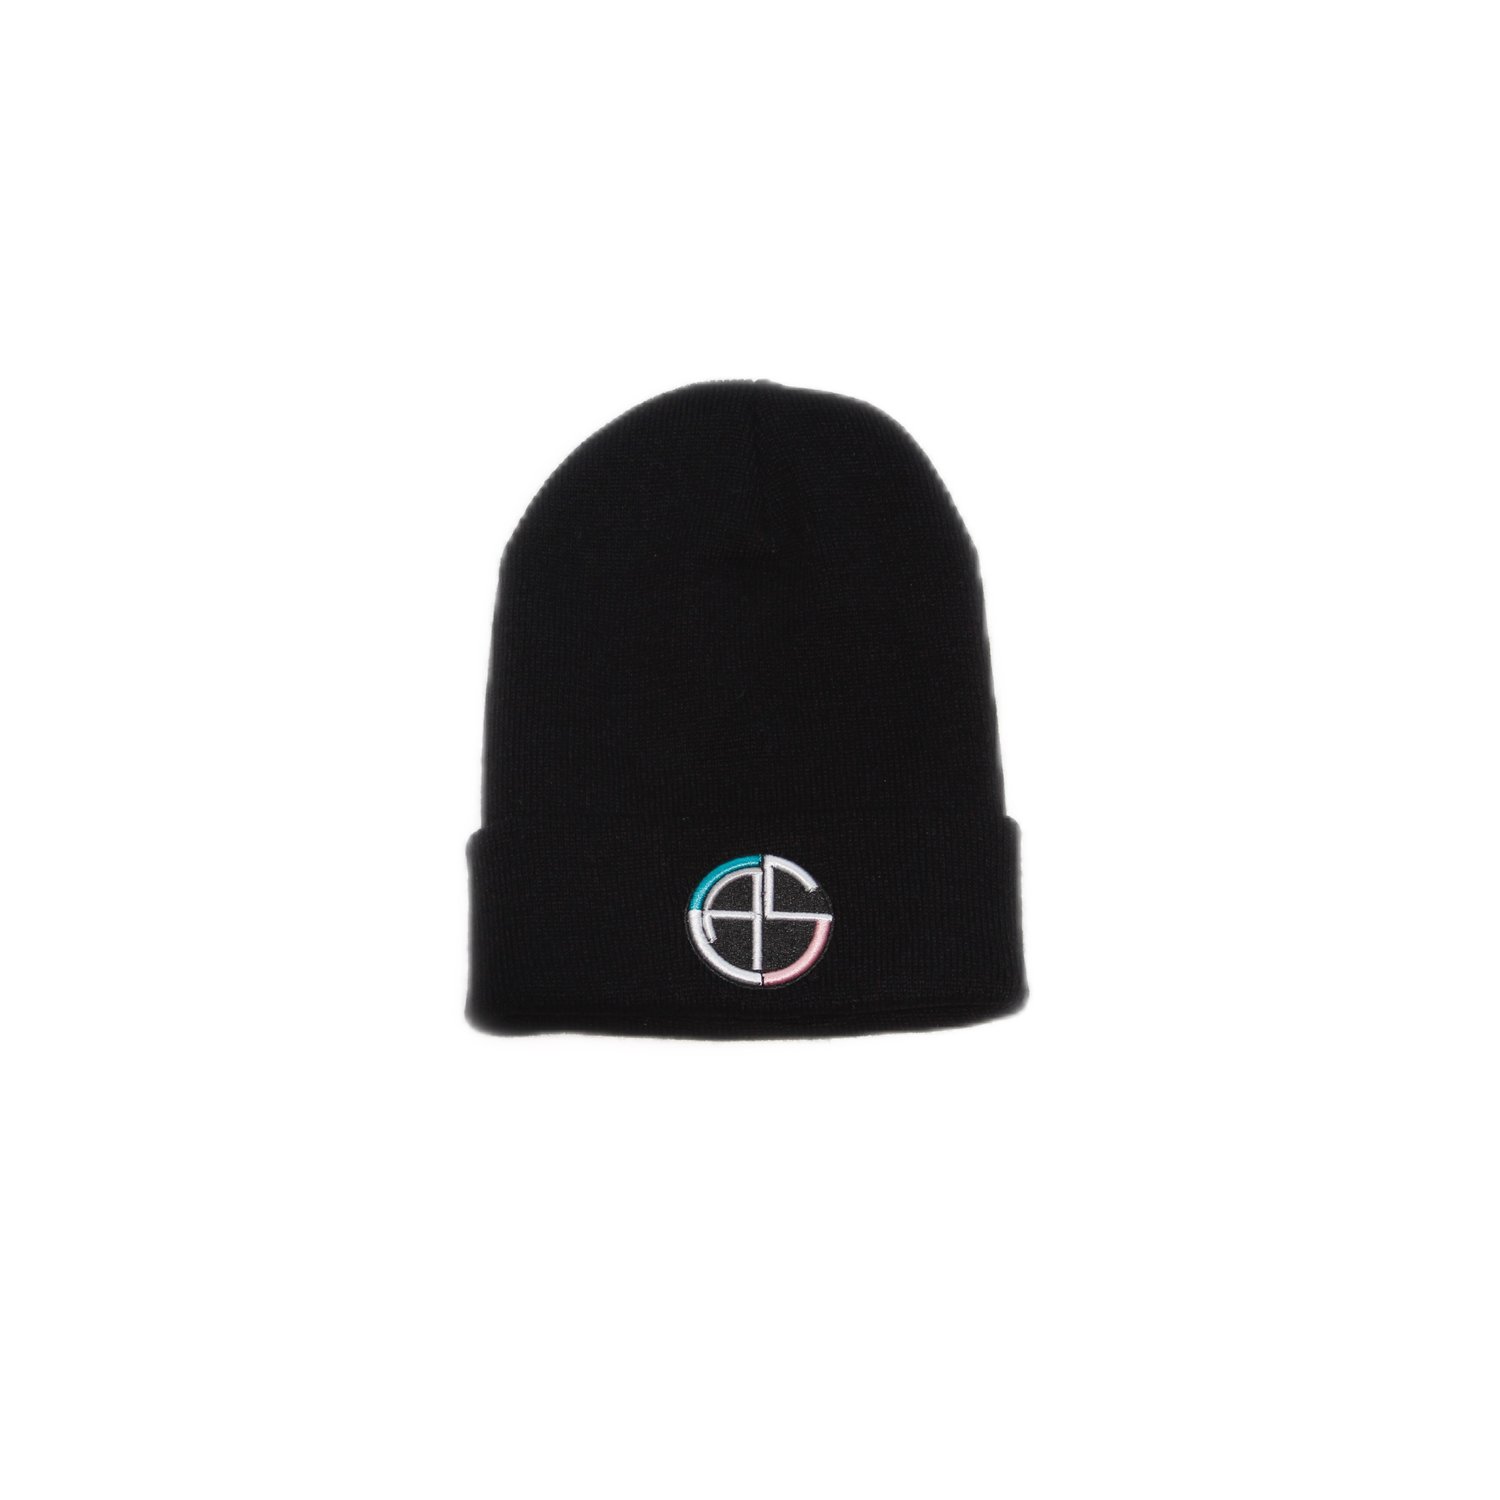 Image of C.A.S. Black Beanie